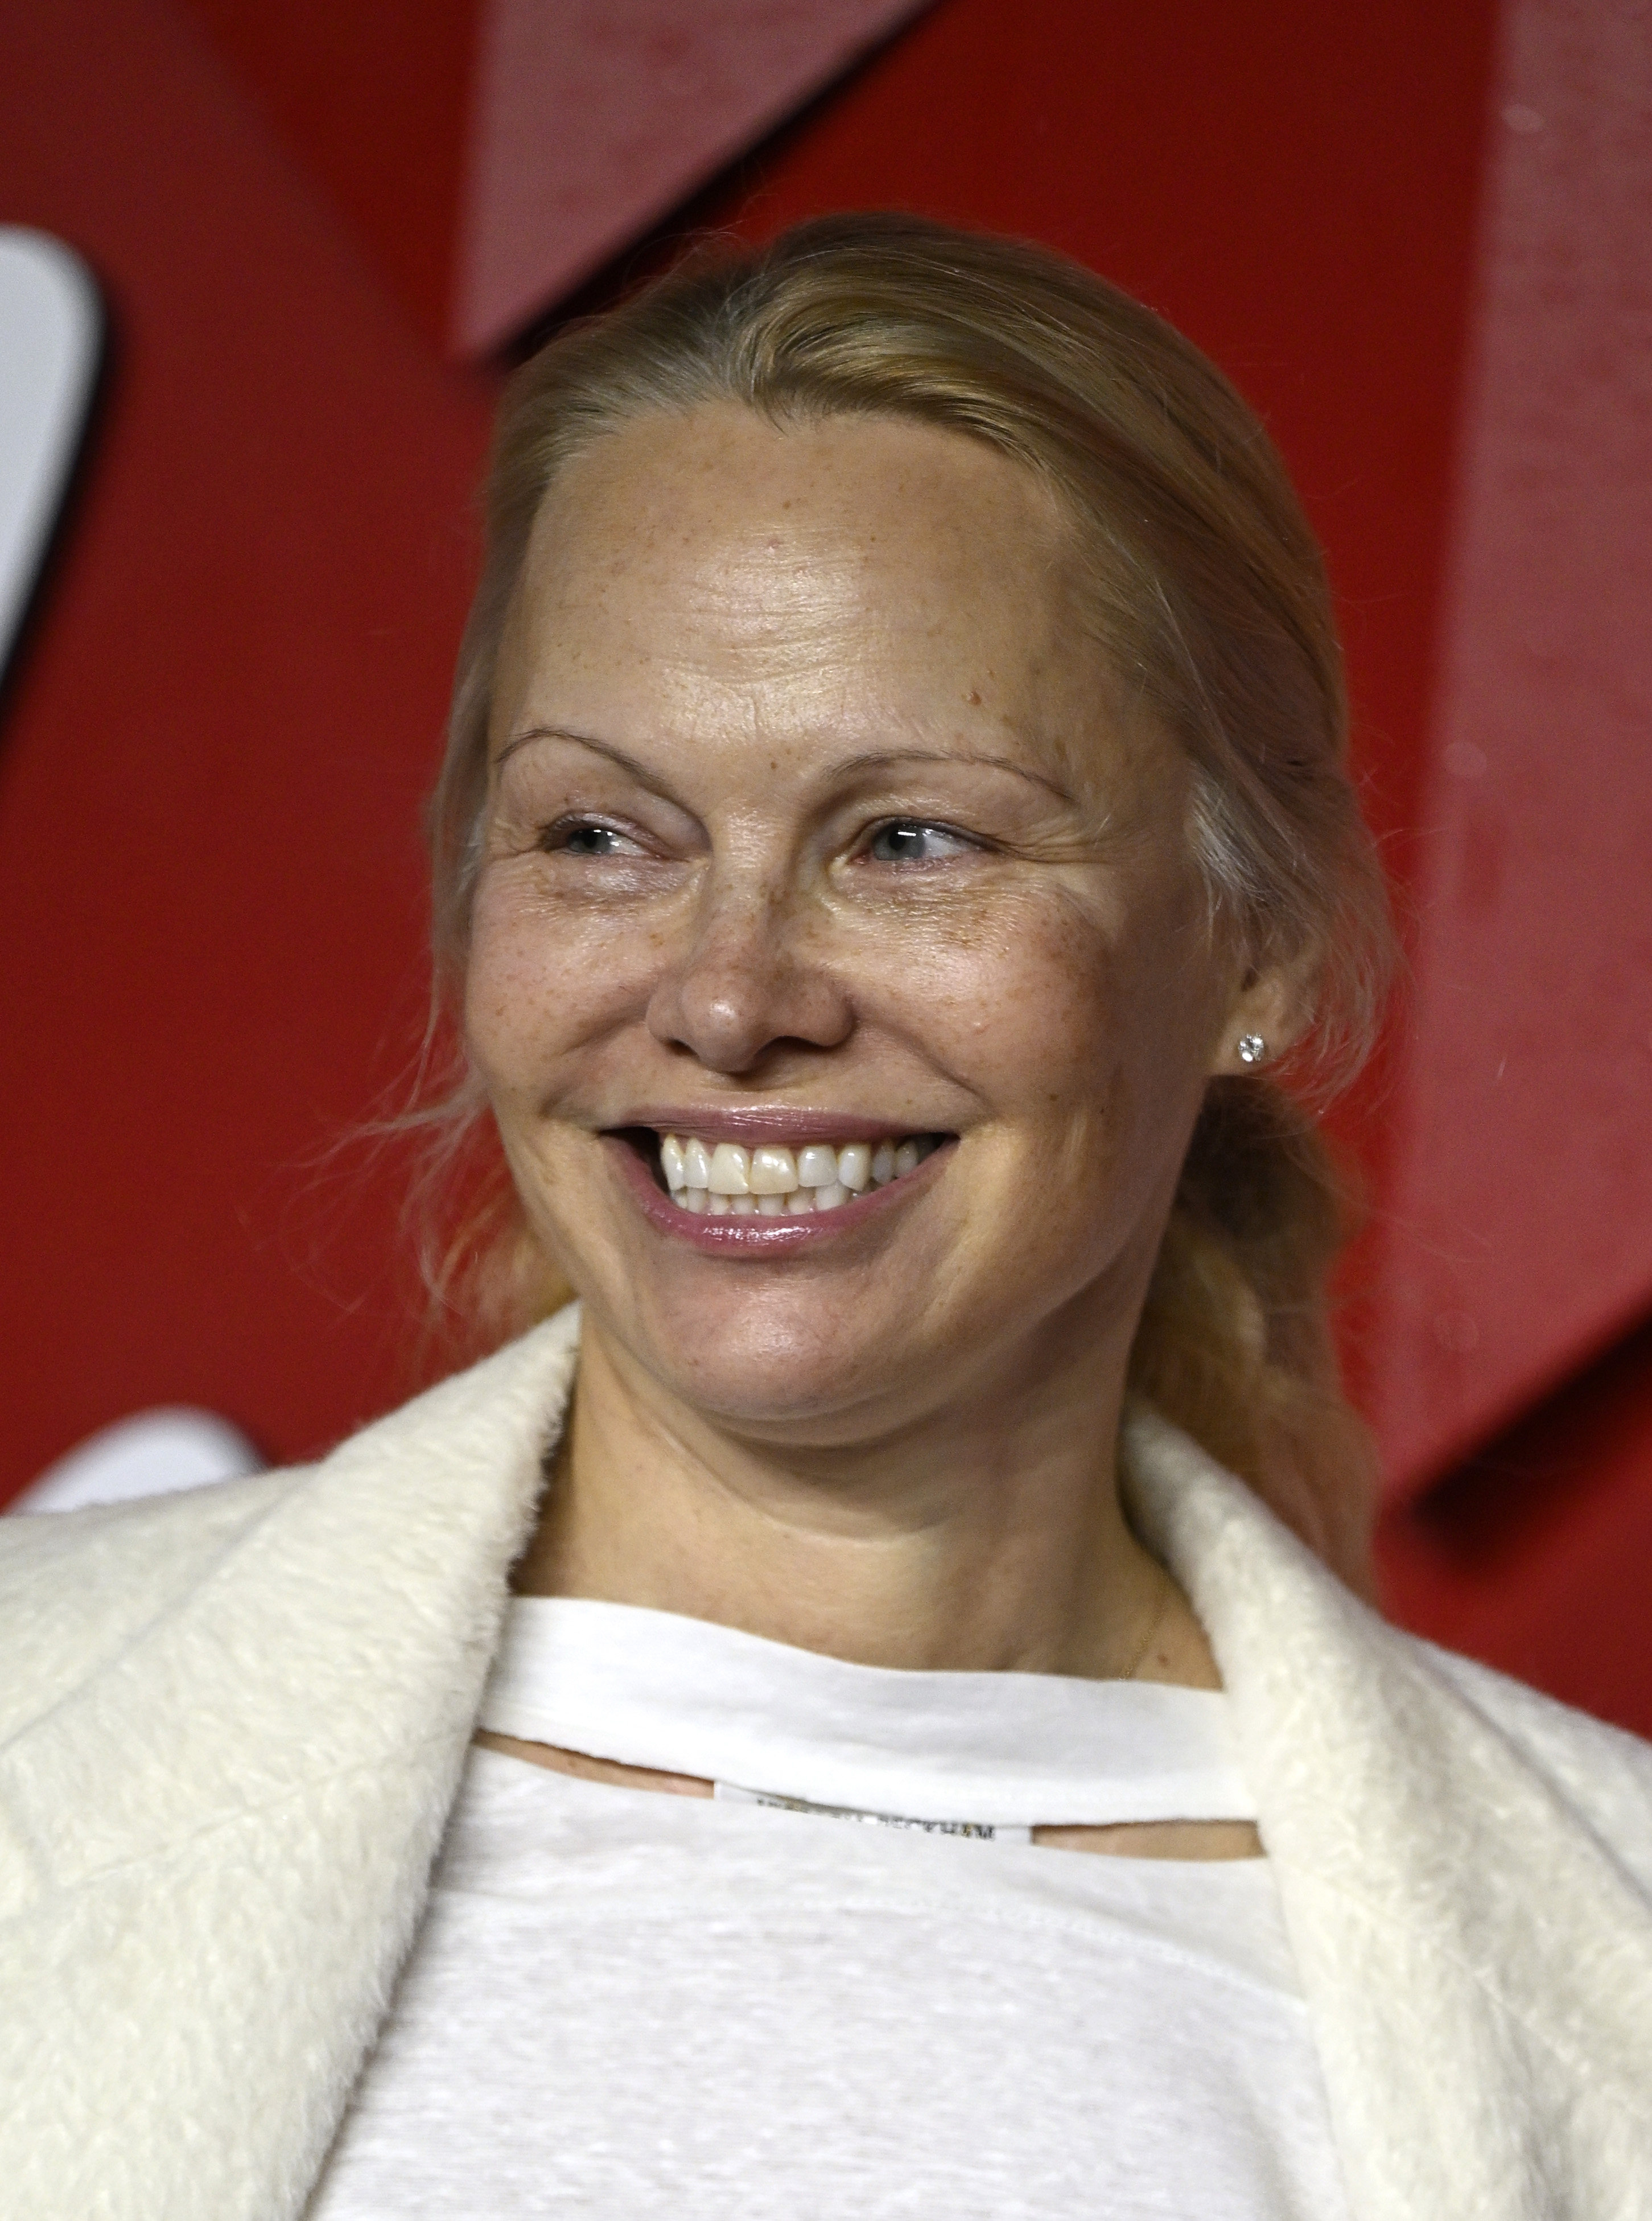 Pamela Anderson attends The Fashion Awards 2023 at the Royal Albert Hall in London, England on December 4, 2023.  Her no-make-up look has impressed the general public and other celebrities alike at a time when Gen Z anti-ageing videos on TikTok are going viral. Photo: Getty Images